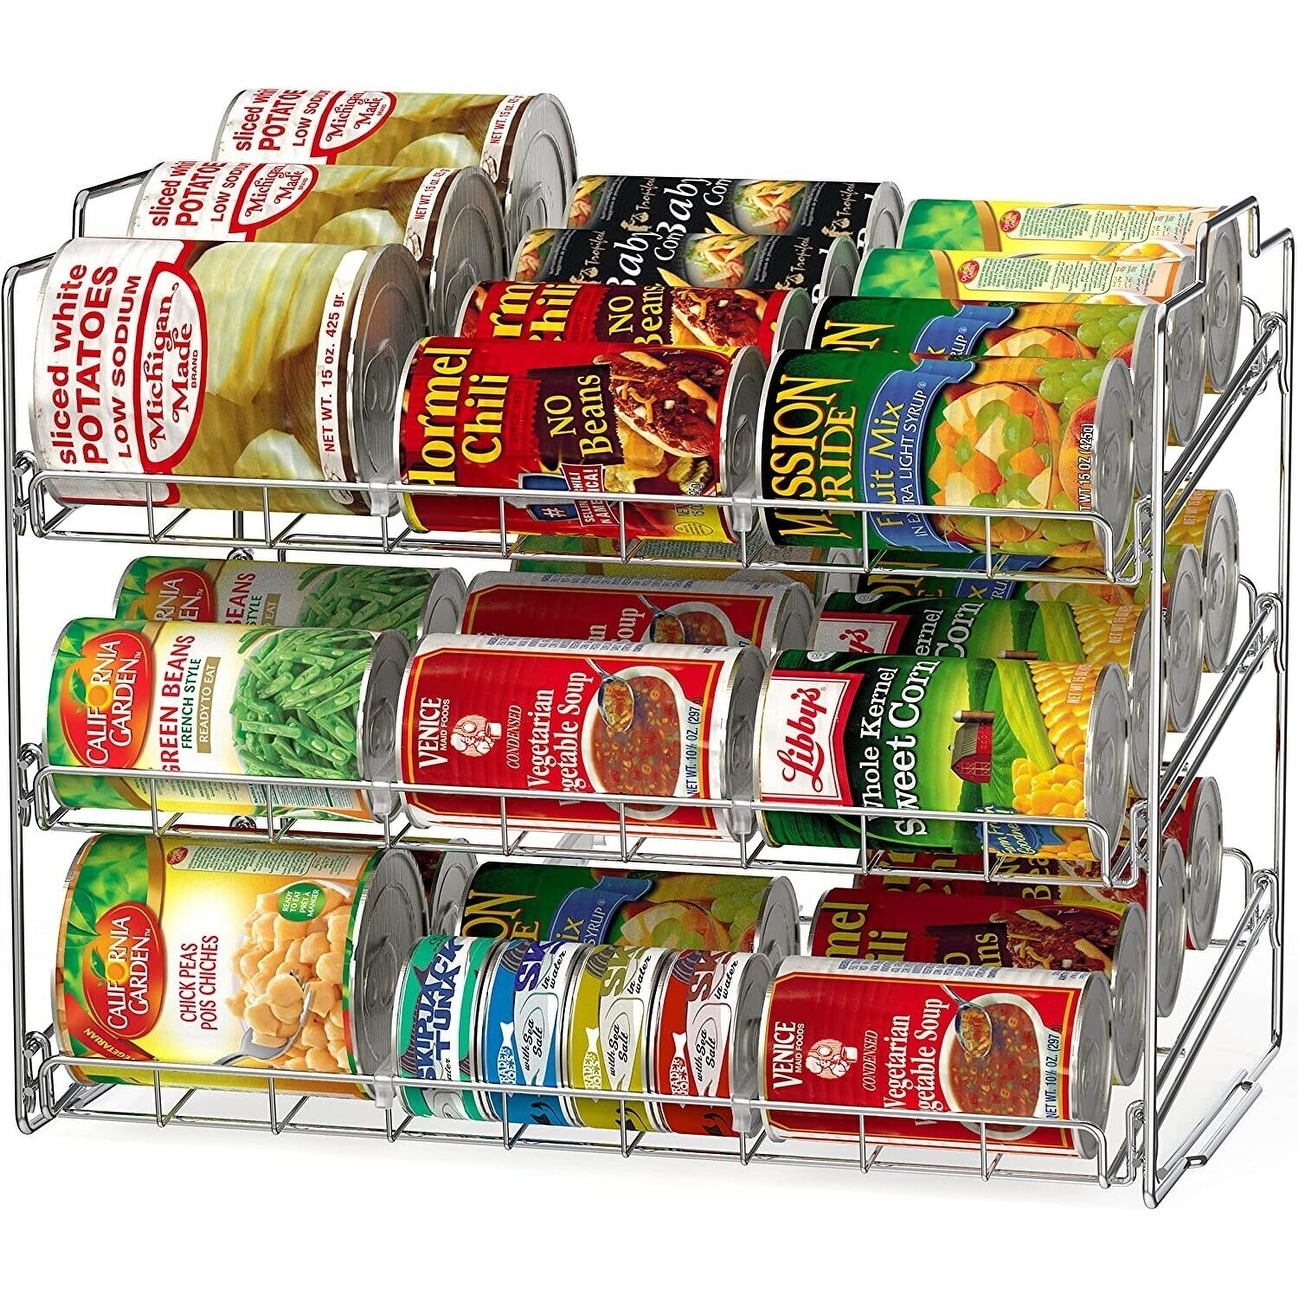 Stackable Can Rack Organizer Storage for Pantry - Bed Bath & Beyond -  38300150